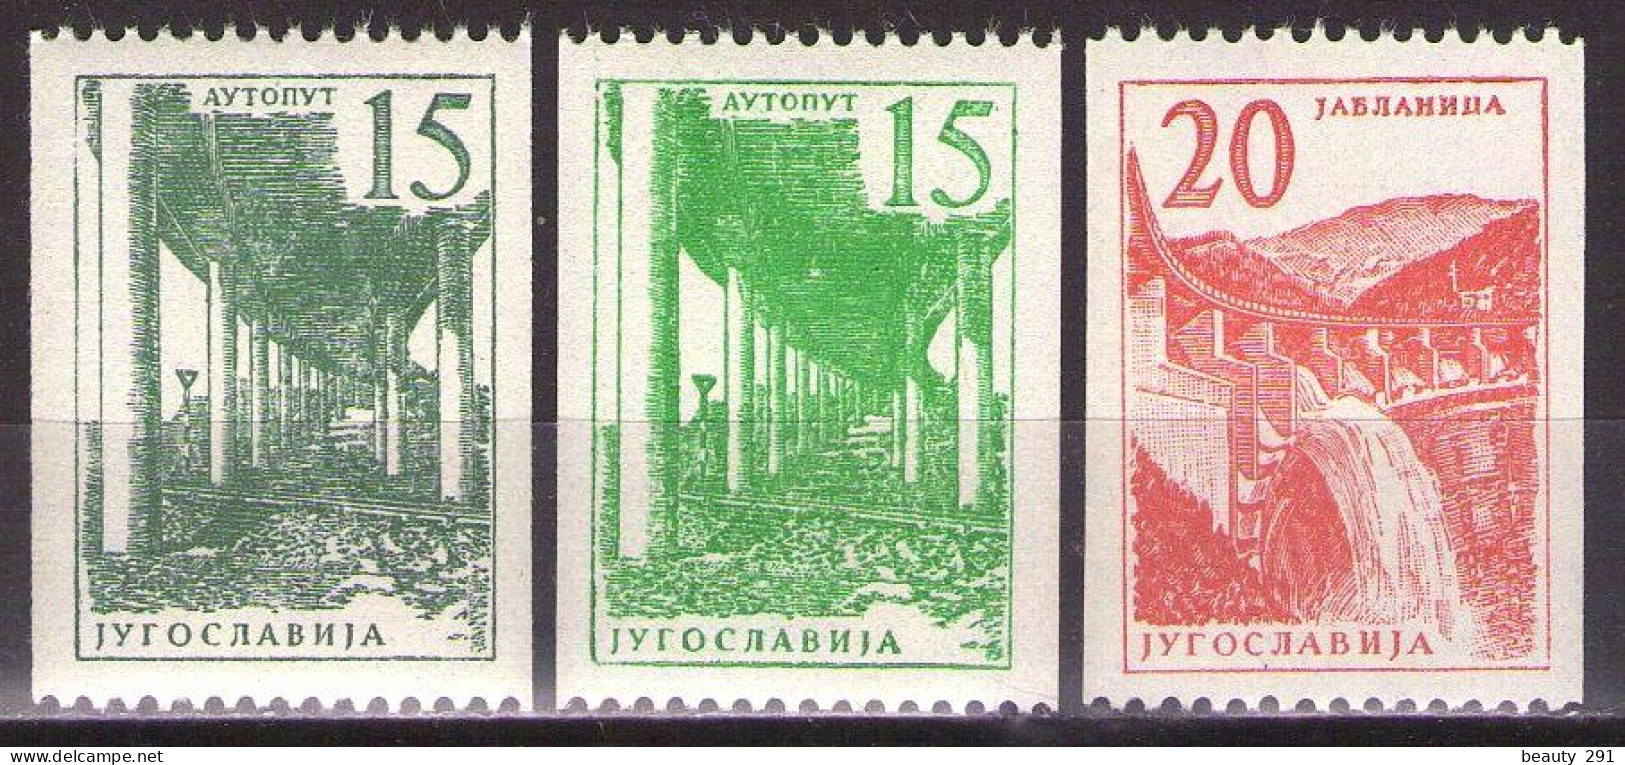 Yugoslavia 1959 - Industry And Architecture Coil Stamps - Mi 898-899a,b - MNH**VF - Unused Stamps